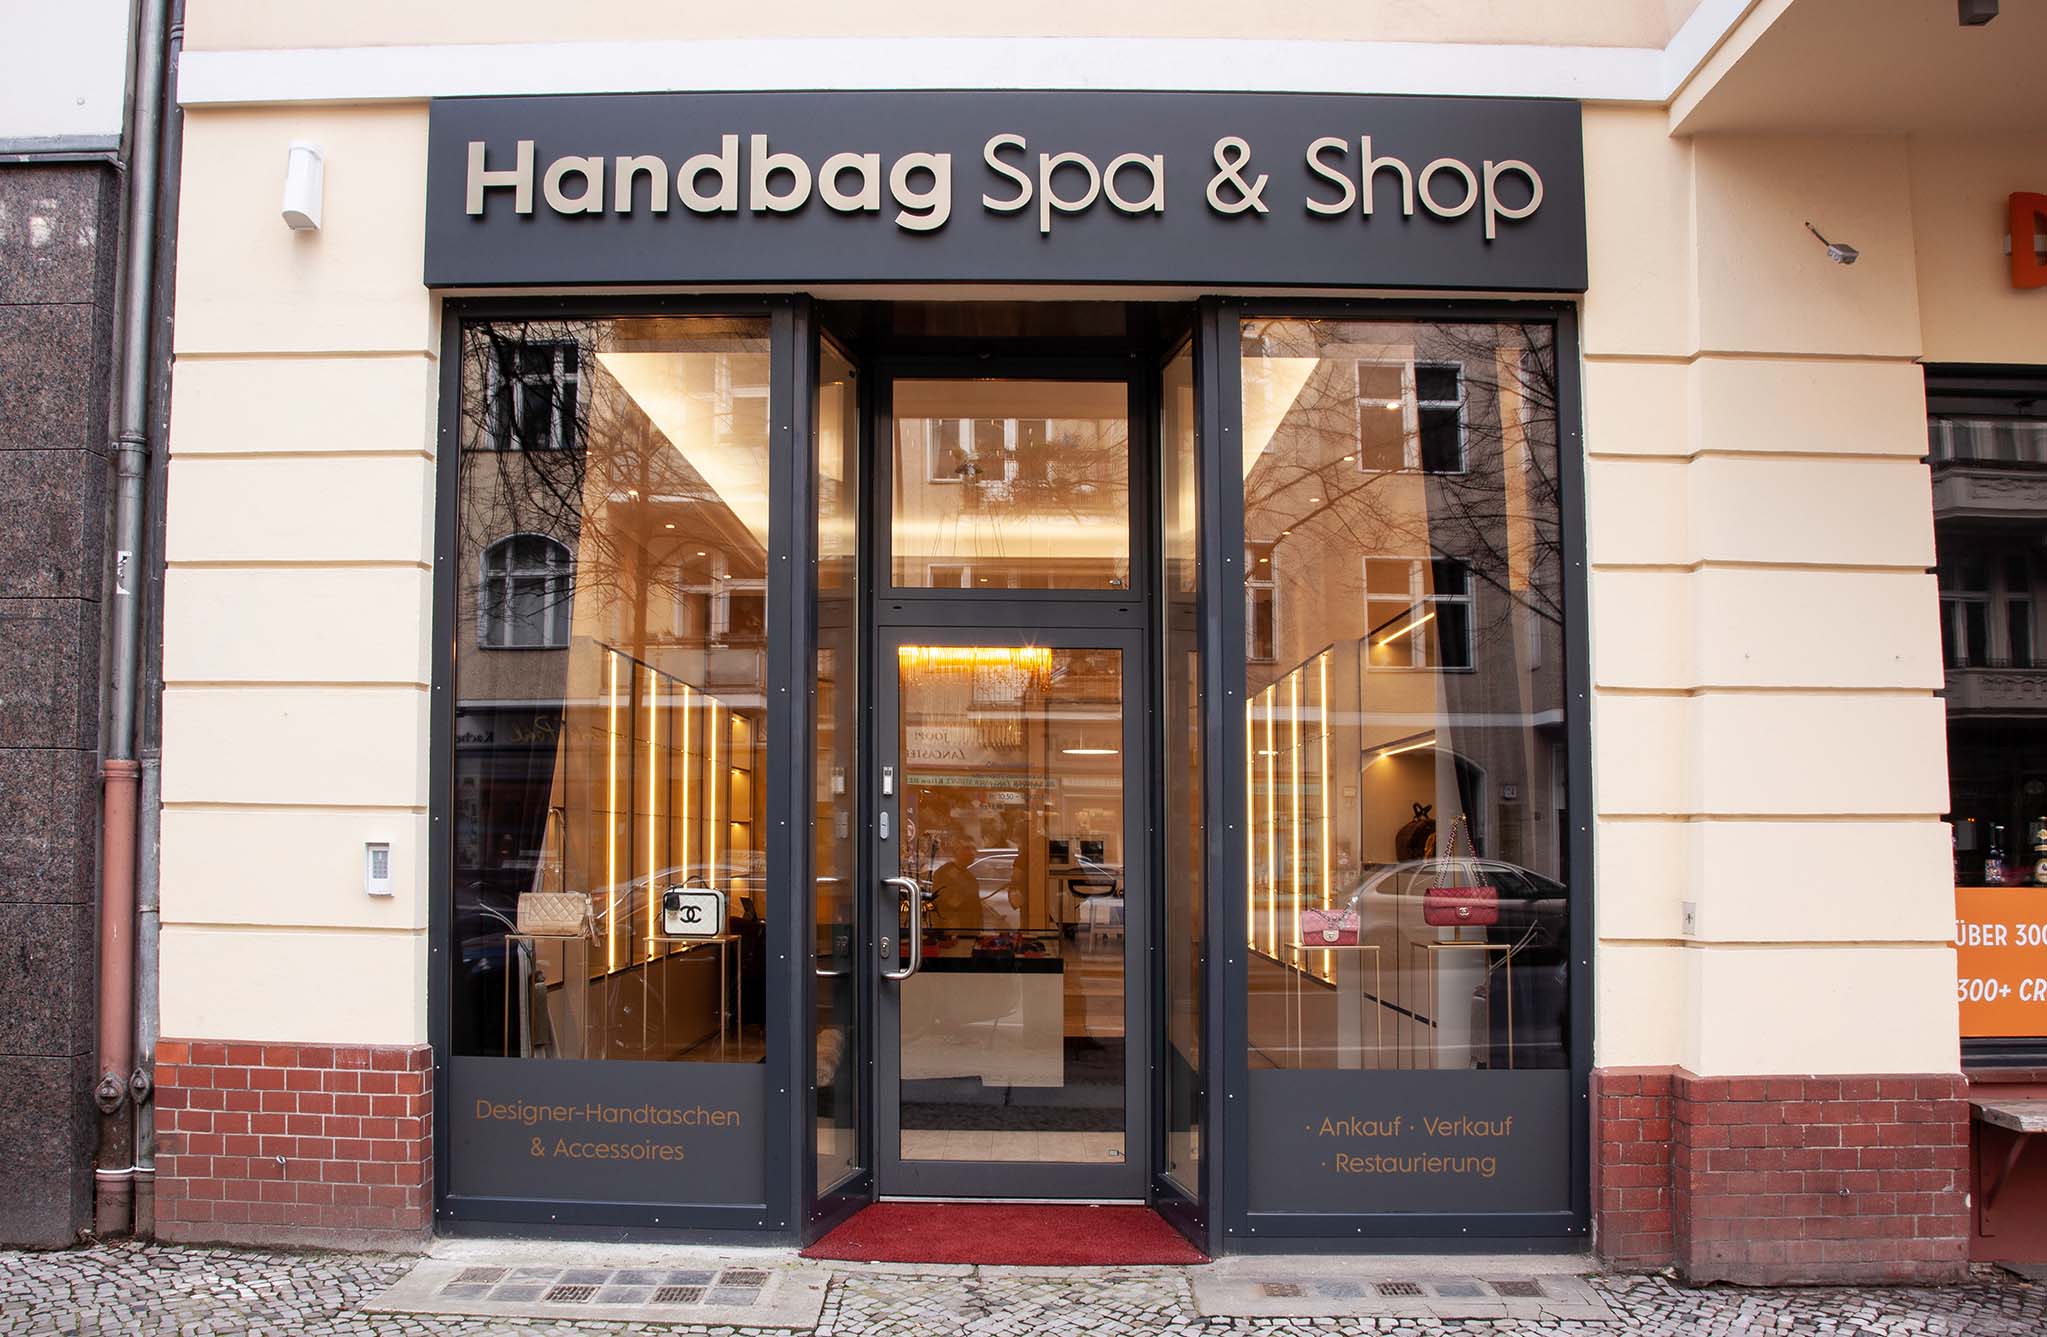 Quality Bag Spa — Cleaning & Restoration — Delivered to You